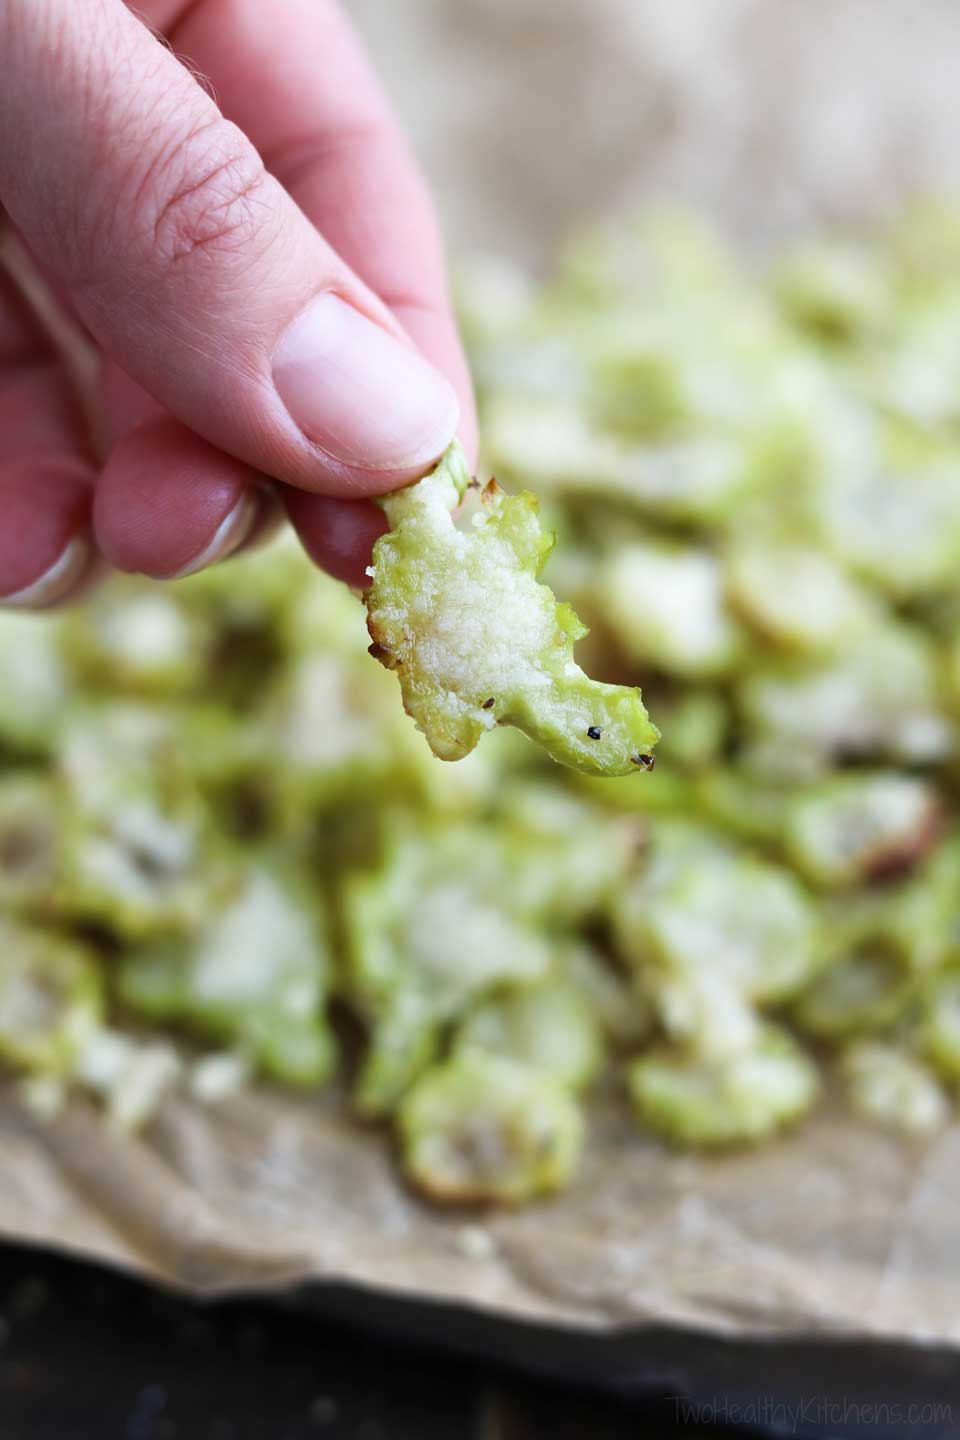 Doesn’t this roasted parmesan broccoli chip look just like a little turtle?!?! How cute!